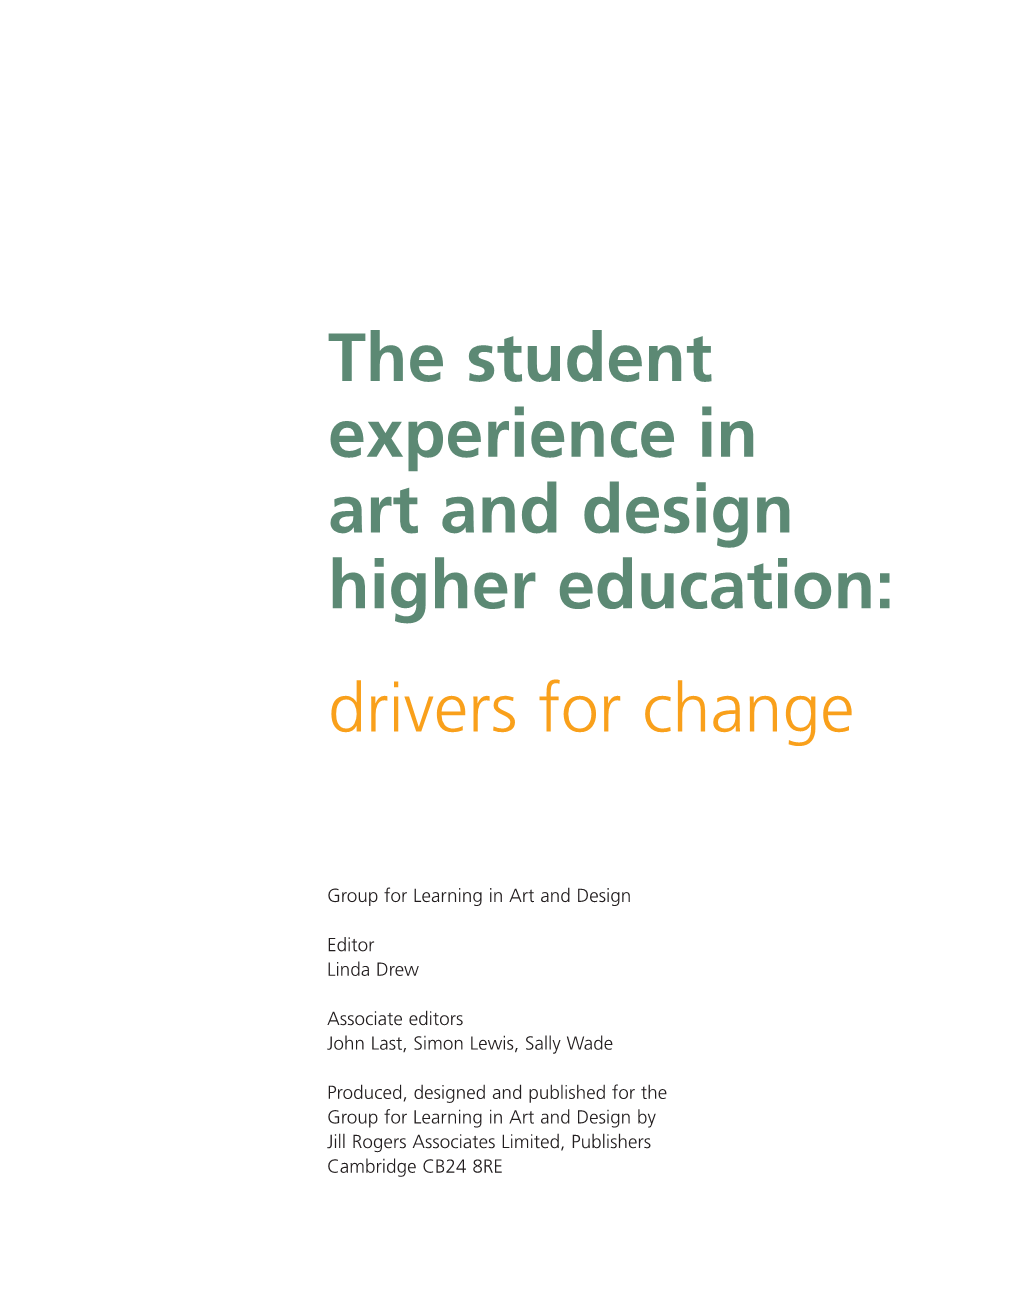 The Student Experience in Art and Design Higher Education: Drivers for Change